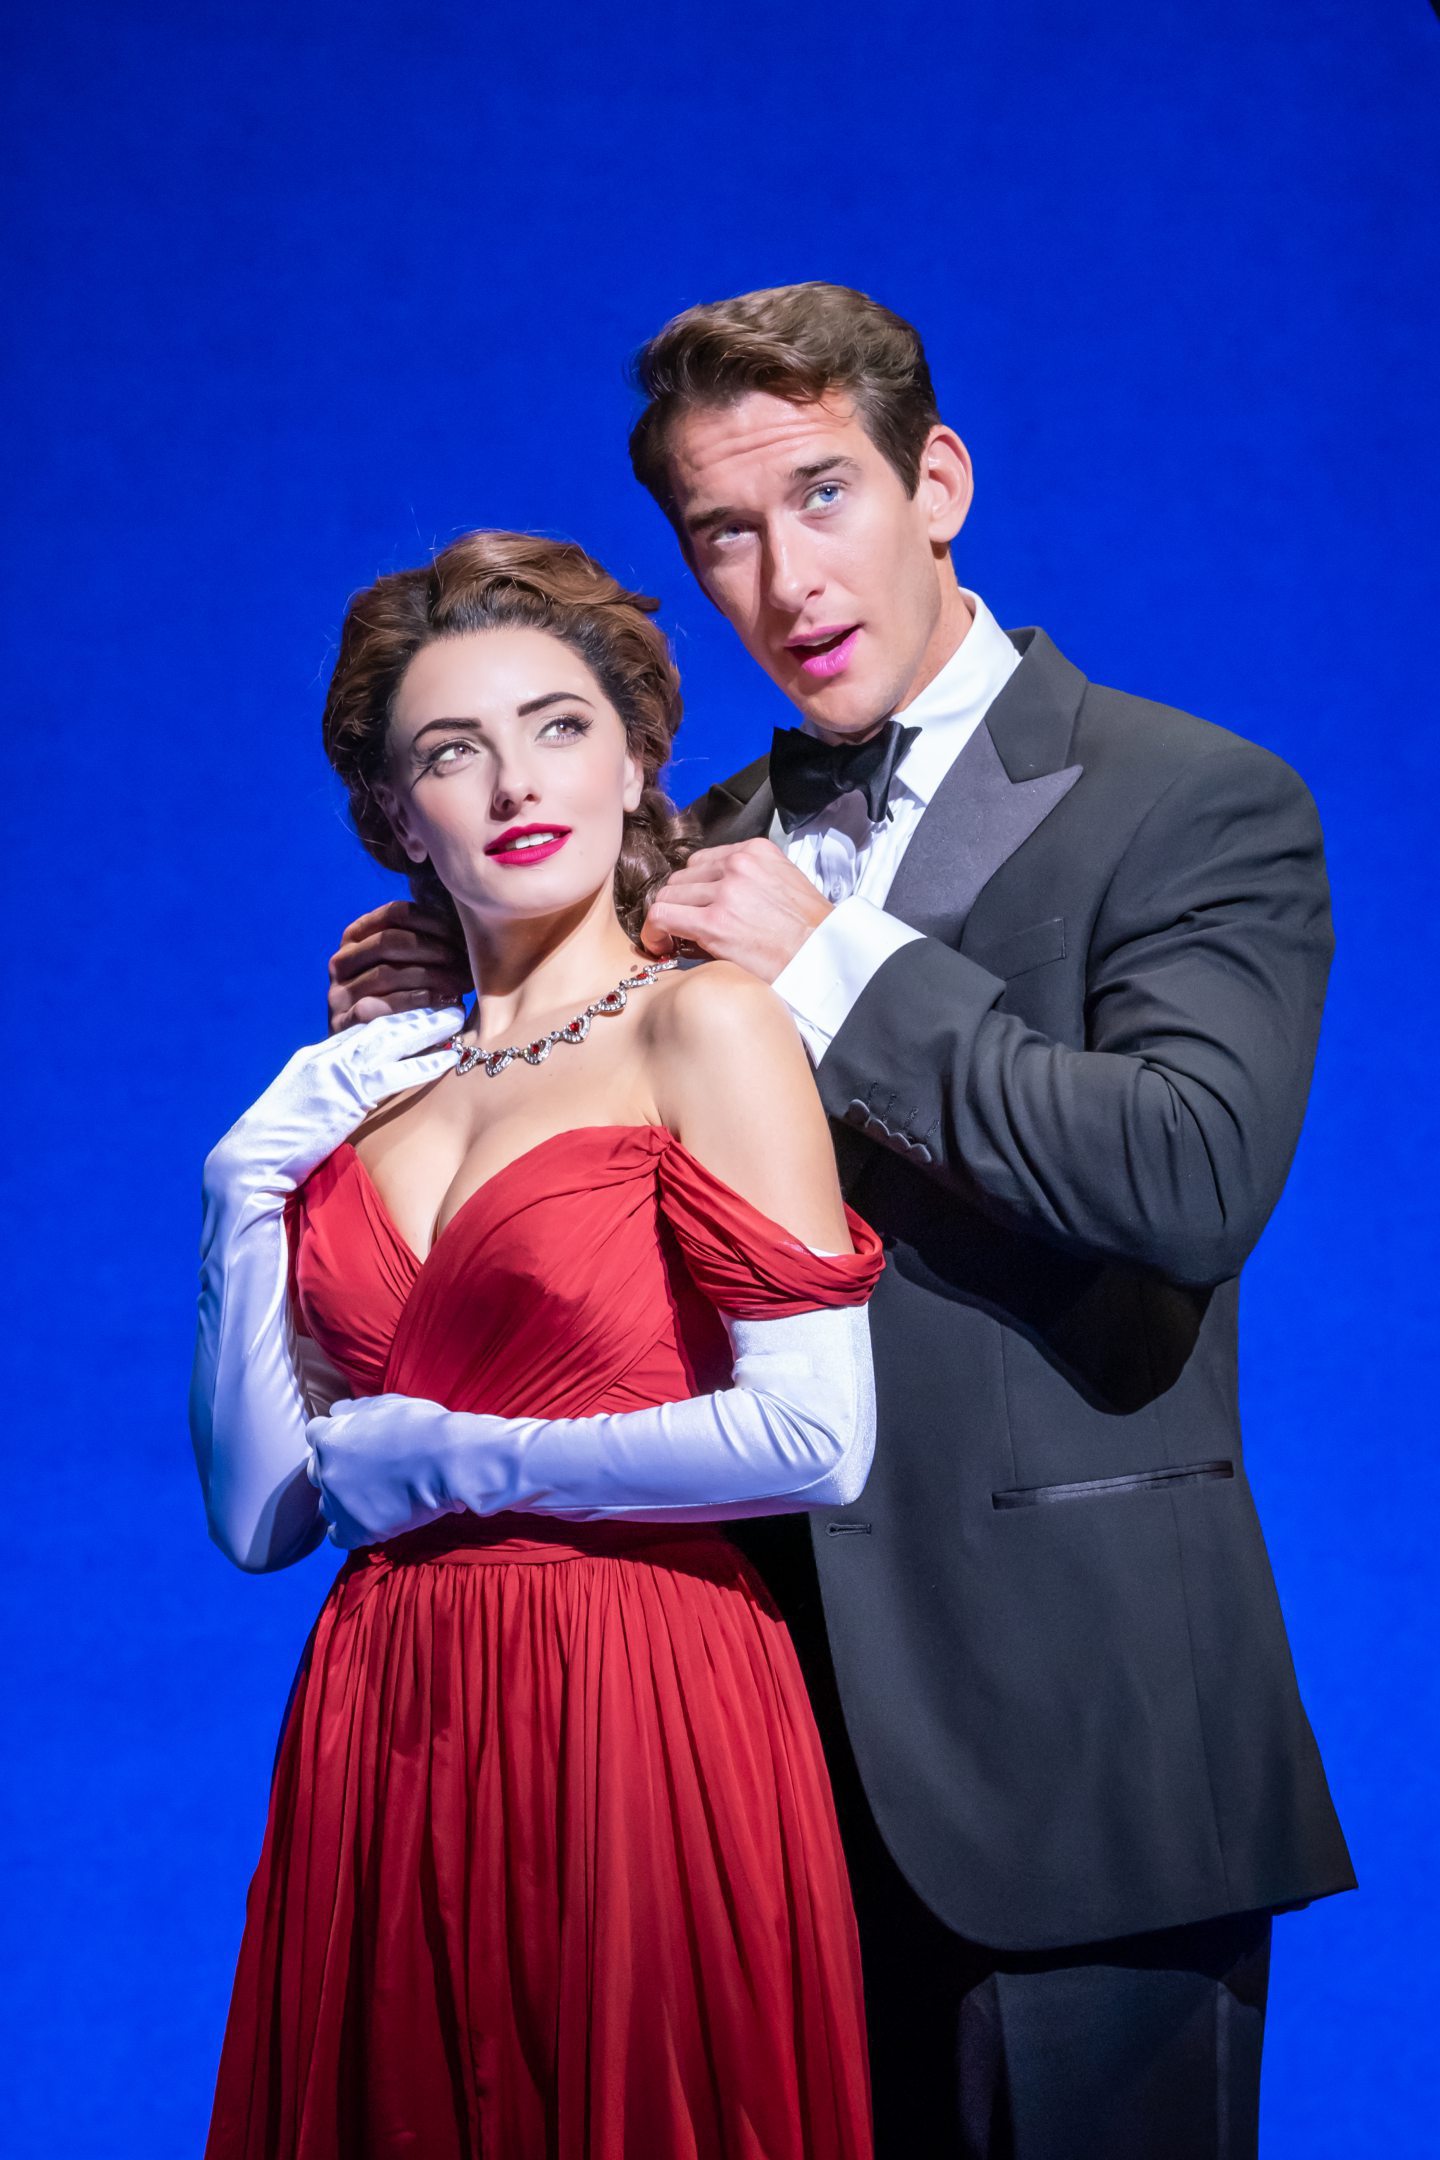 Olivier Savile as Edward and Elly Jay as Vivian Ward in Pretty Woman - The Musical Aberdeen.